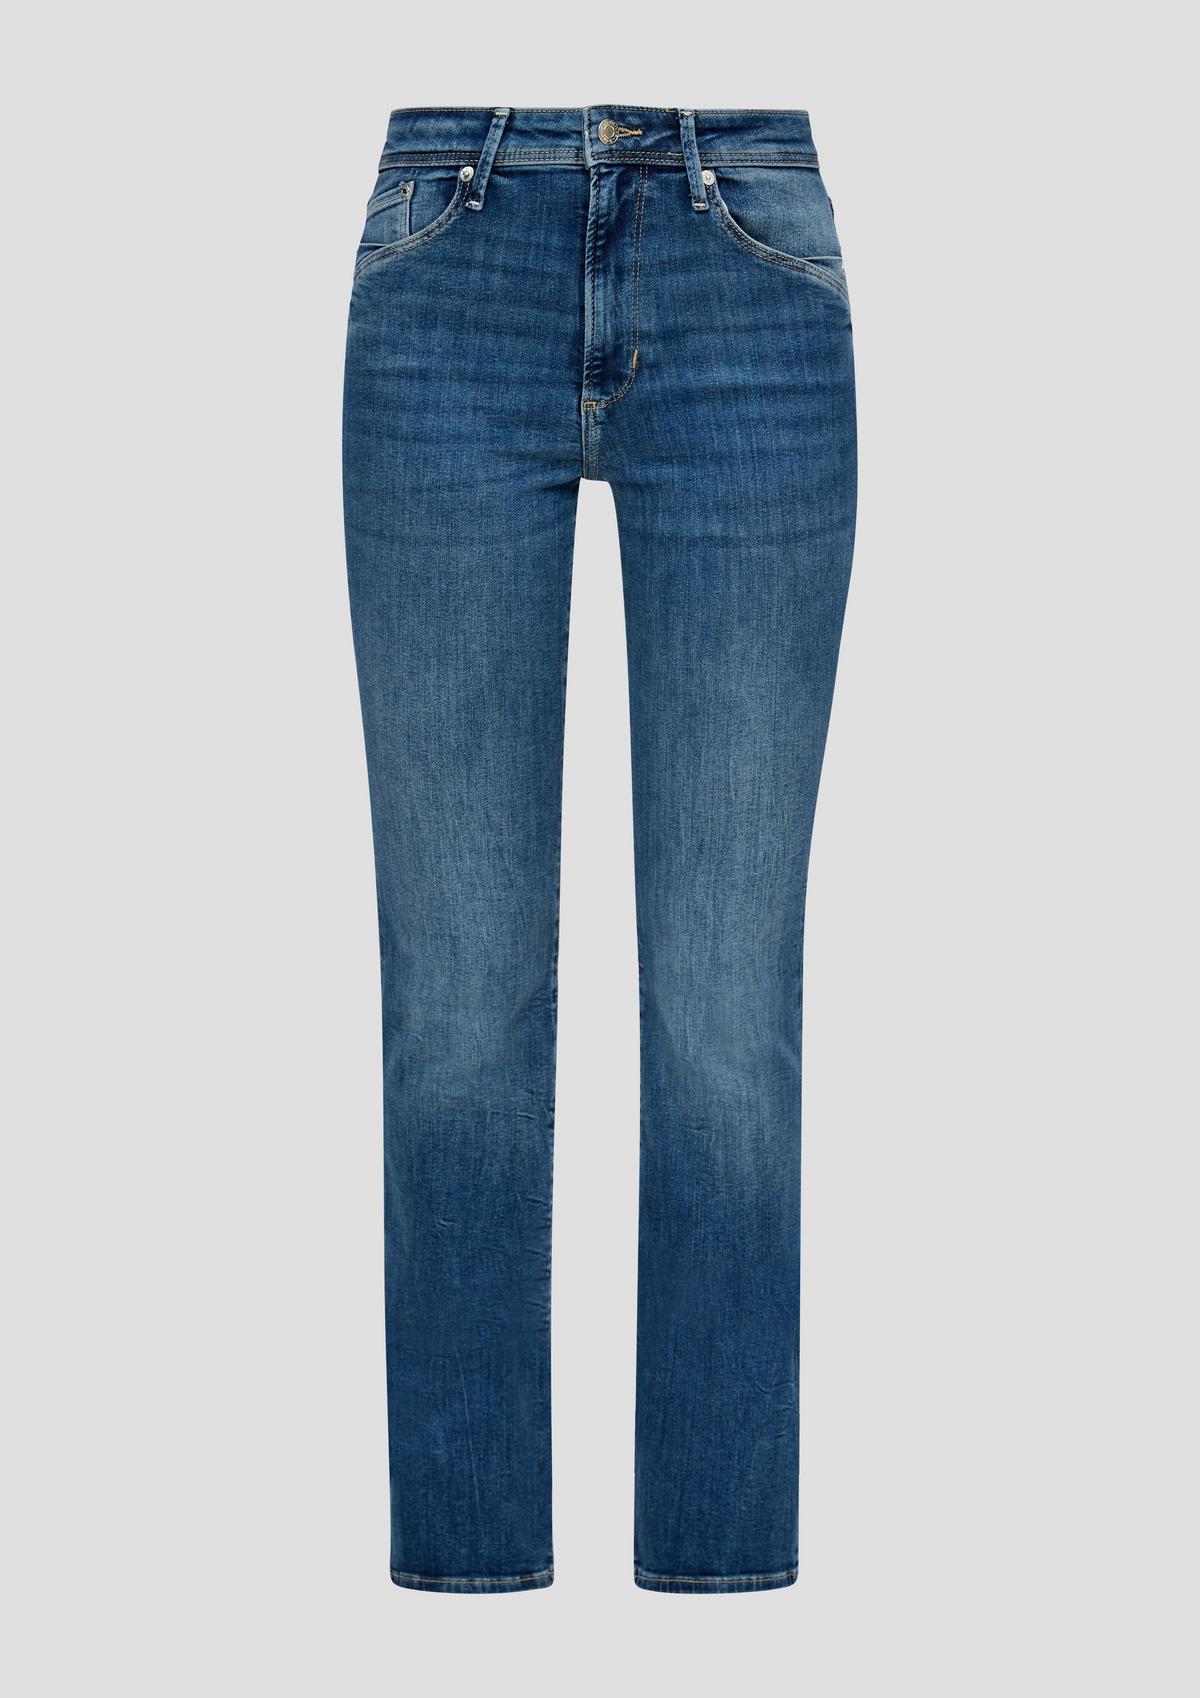 s.Oliver Jeans Beverly / slim fit / high rise / bootcut leg